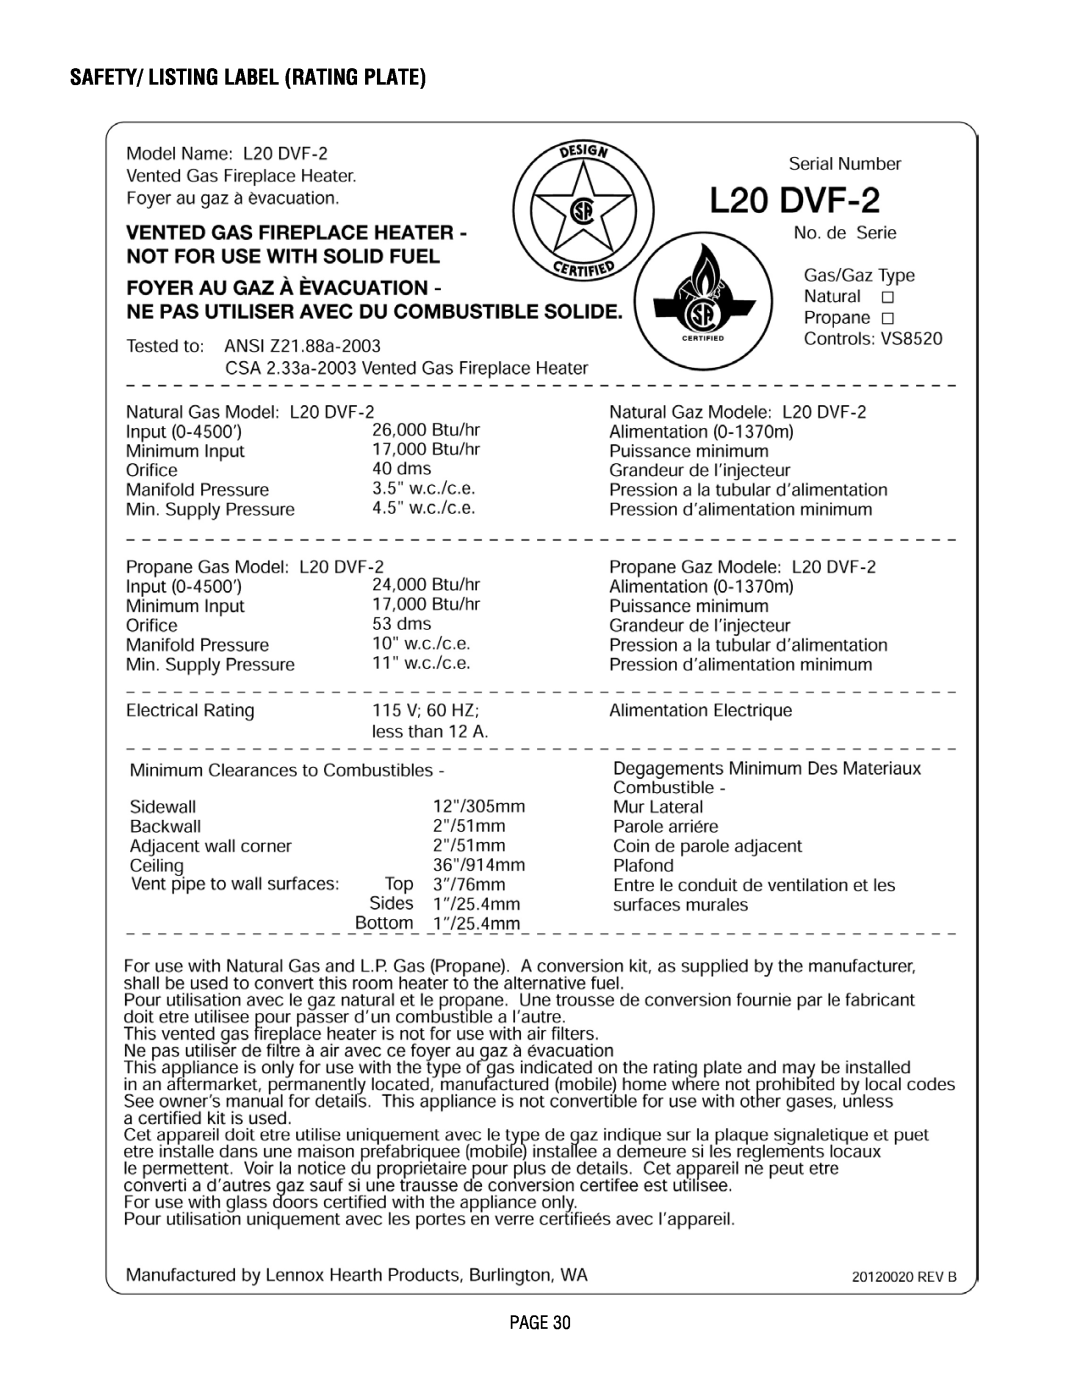 Lennox Hearth L20 DVF-2, L20 BF-2 manual Safety/ Listing Label Rating Plate, Page 